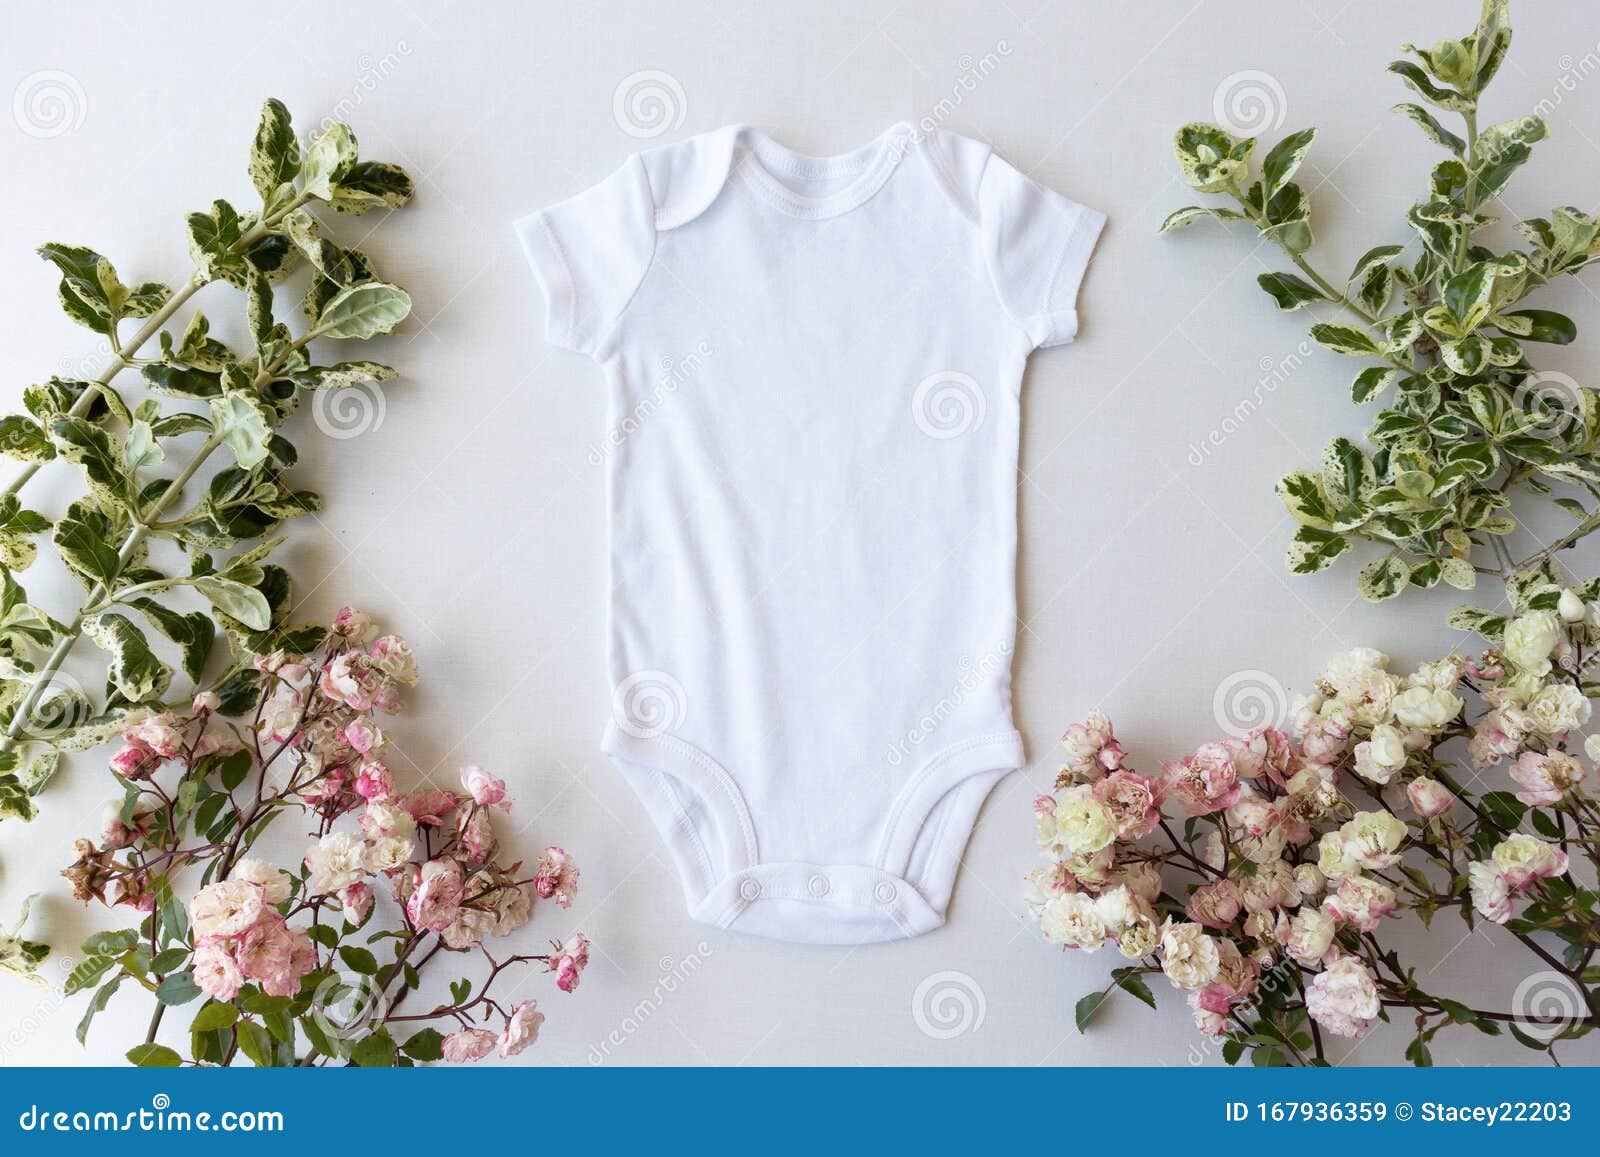 blank white baby grow on an off white background with green leaves and pink roses